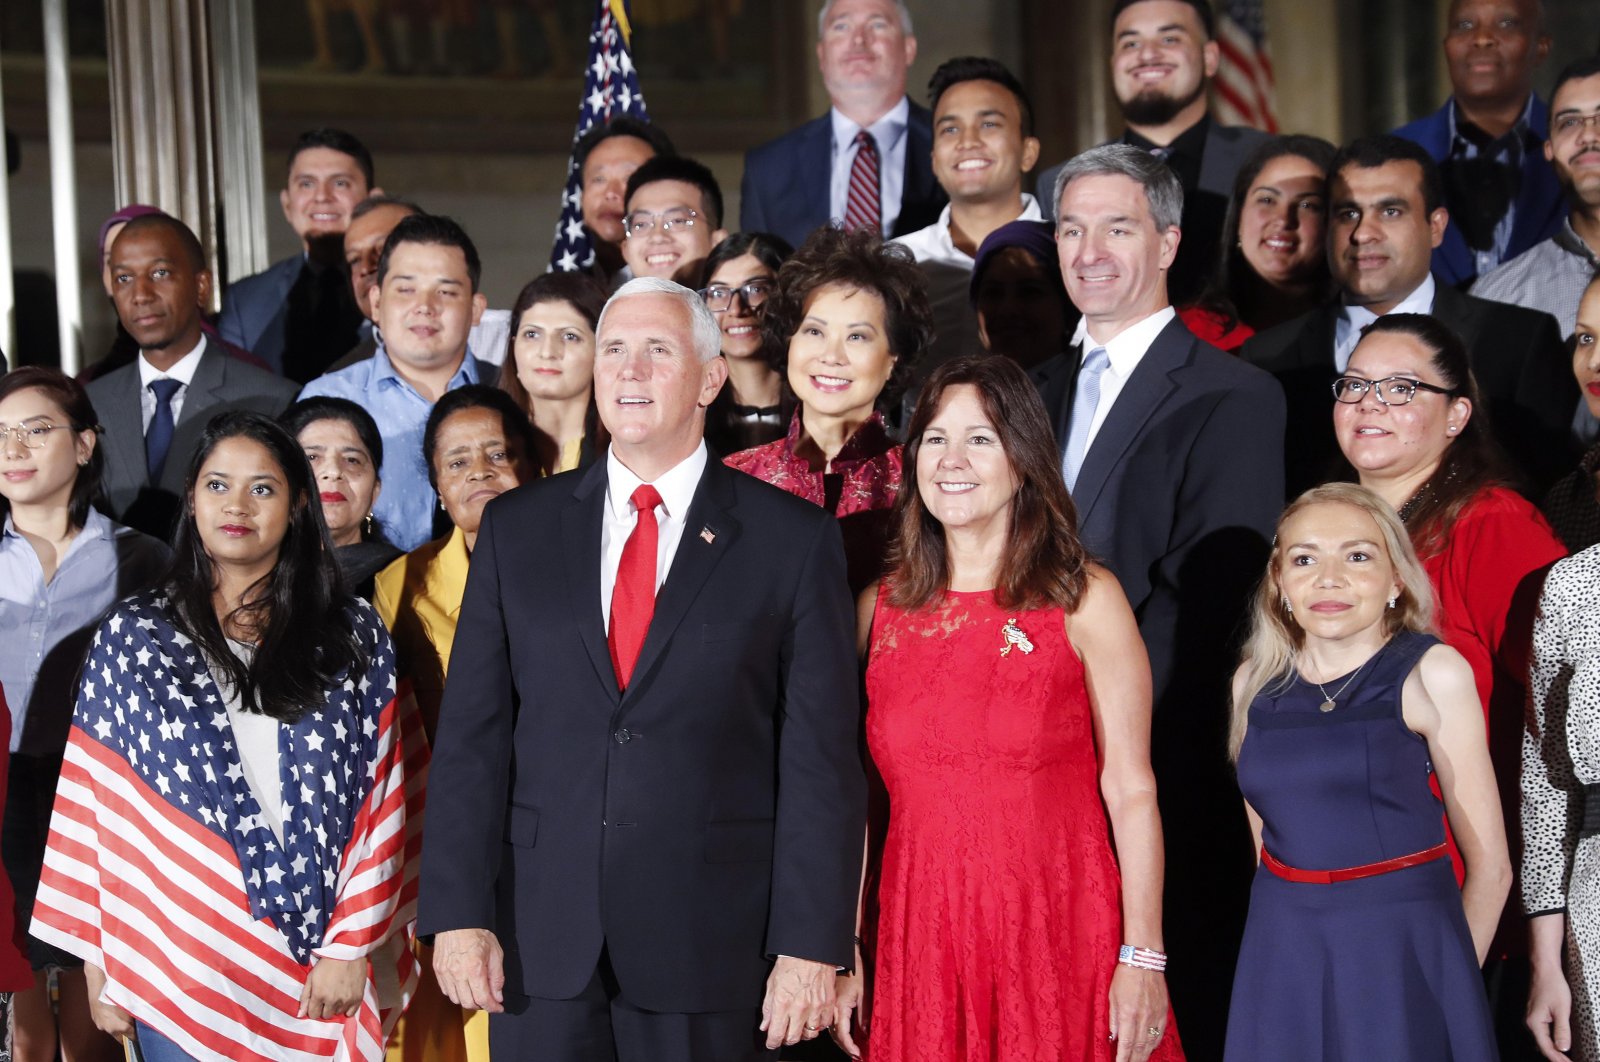 Vice President Mike Pence, center, his wife Karen Pence, to his right.jpg